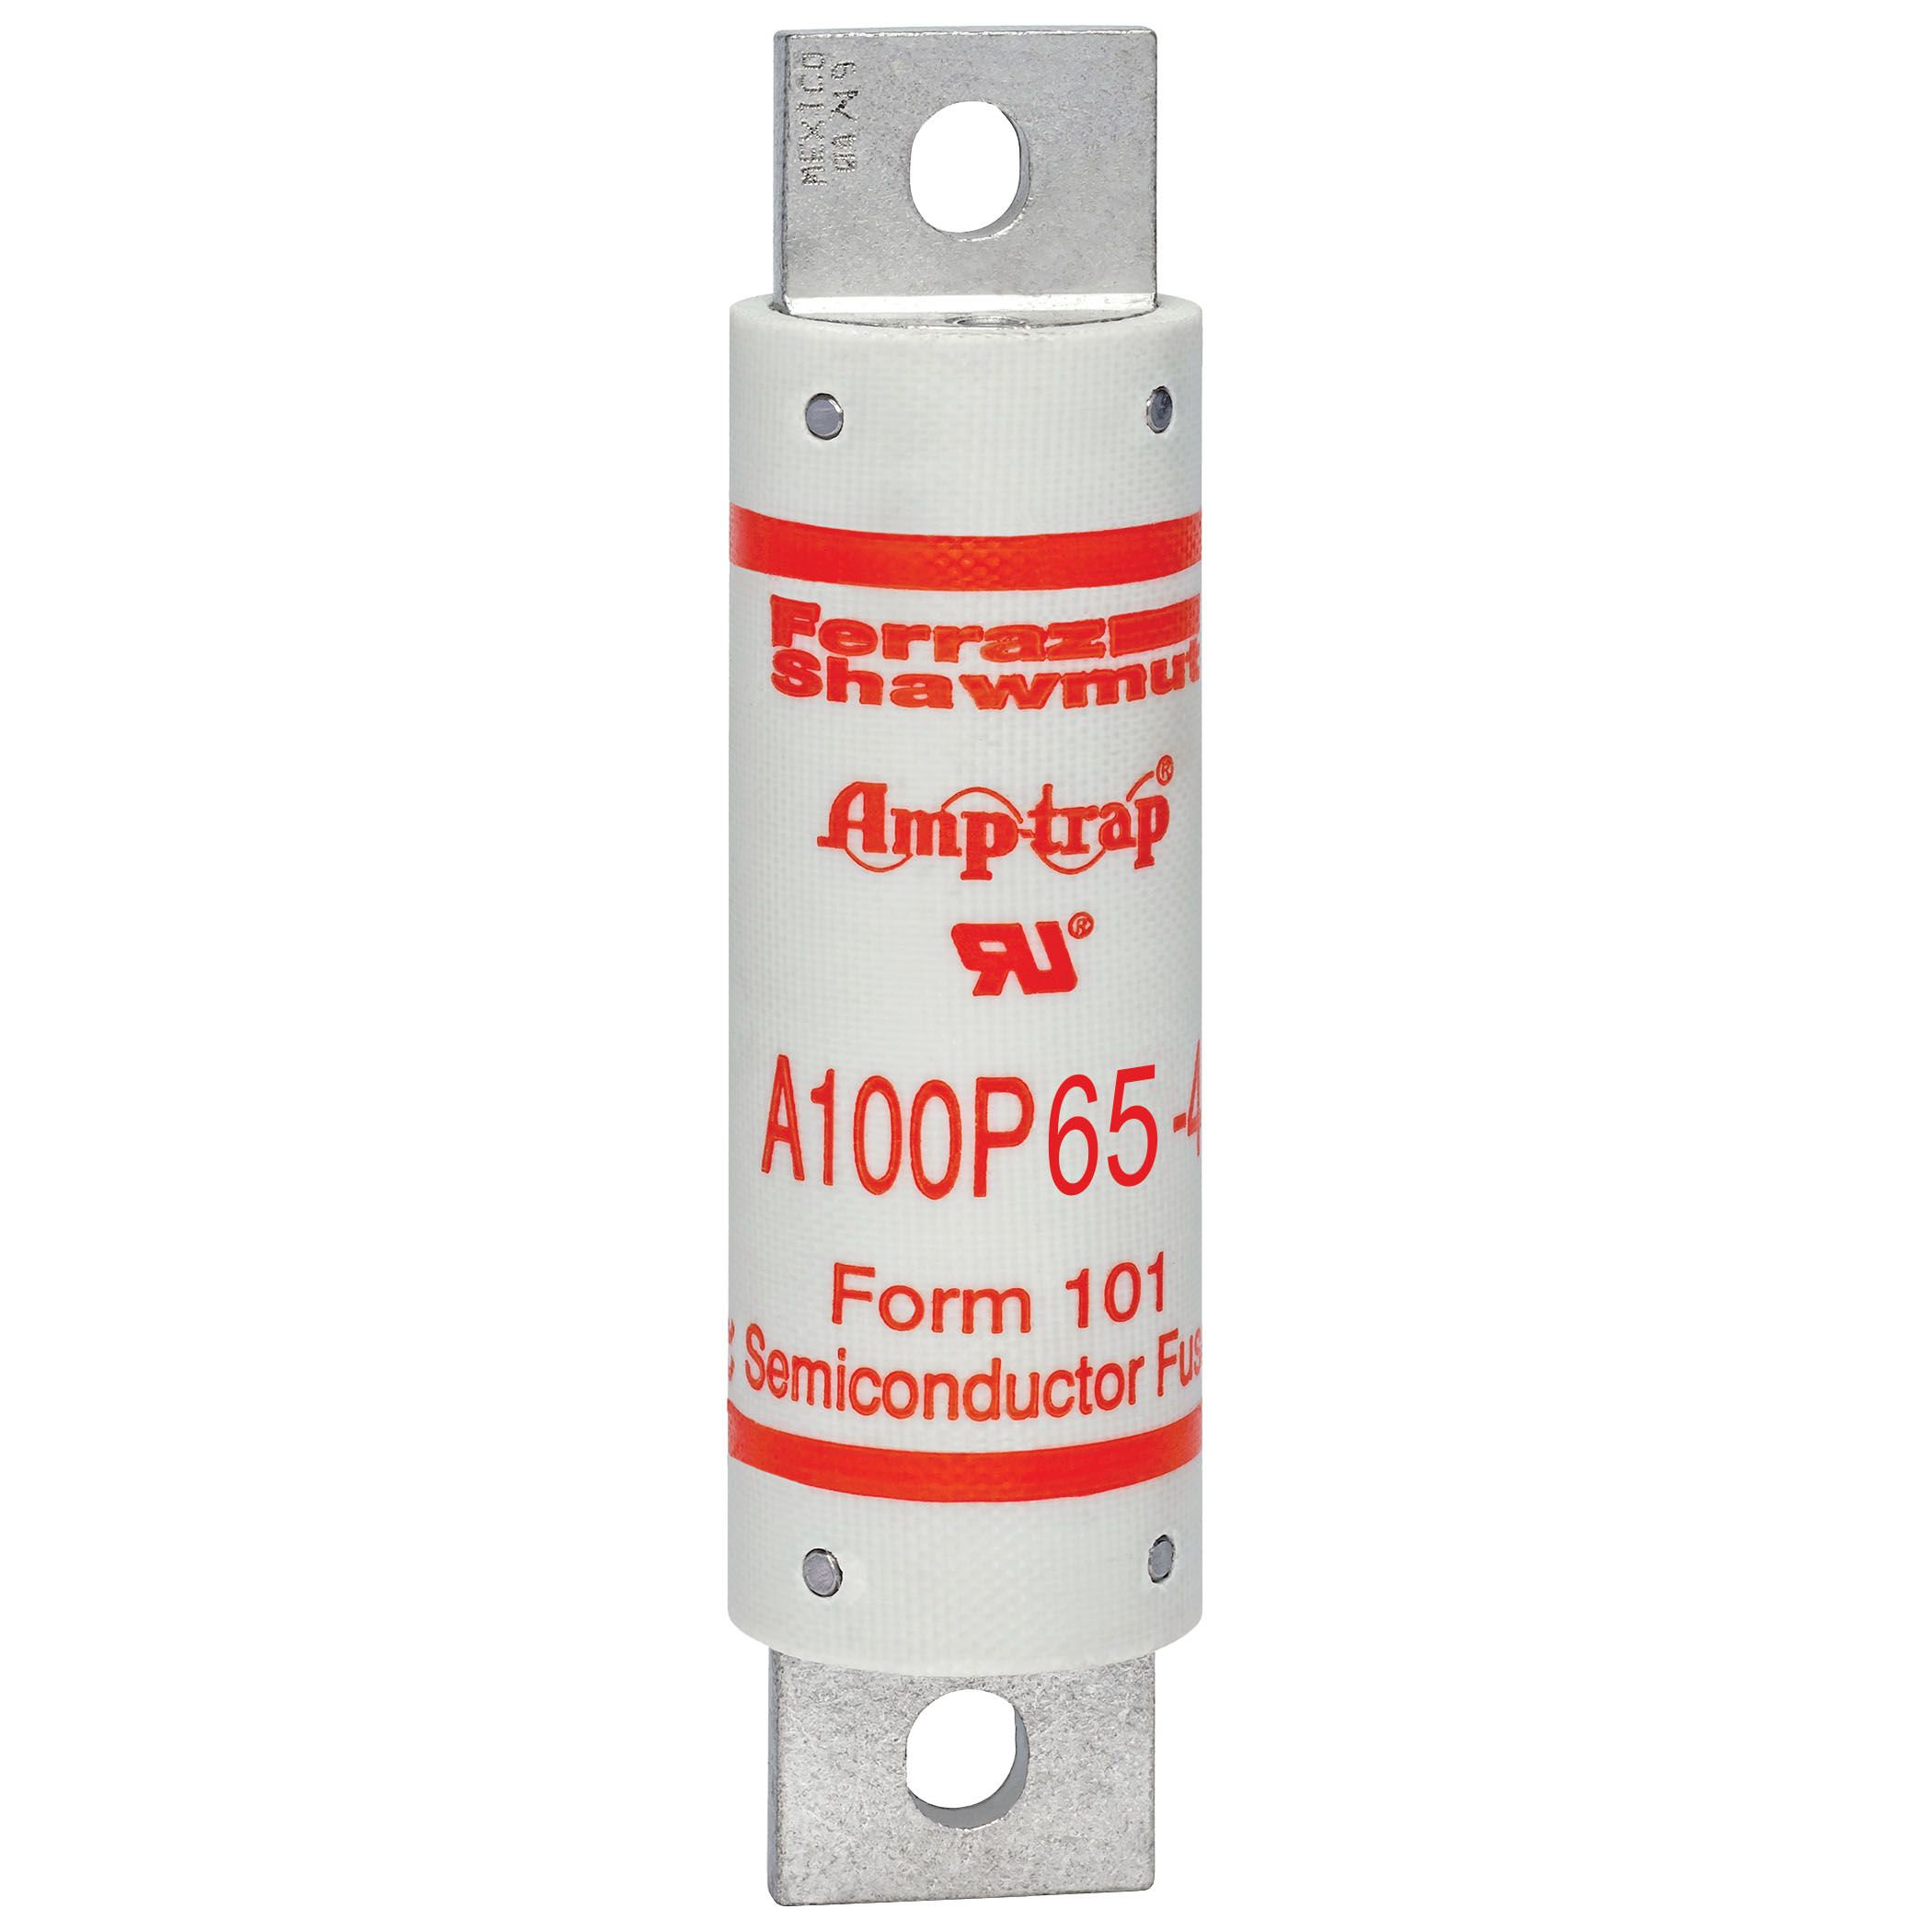 A100P65-4 - Semiconductor Fuse Amp-Trap® 1000V 65A aR High Speed A100P